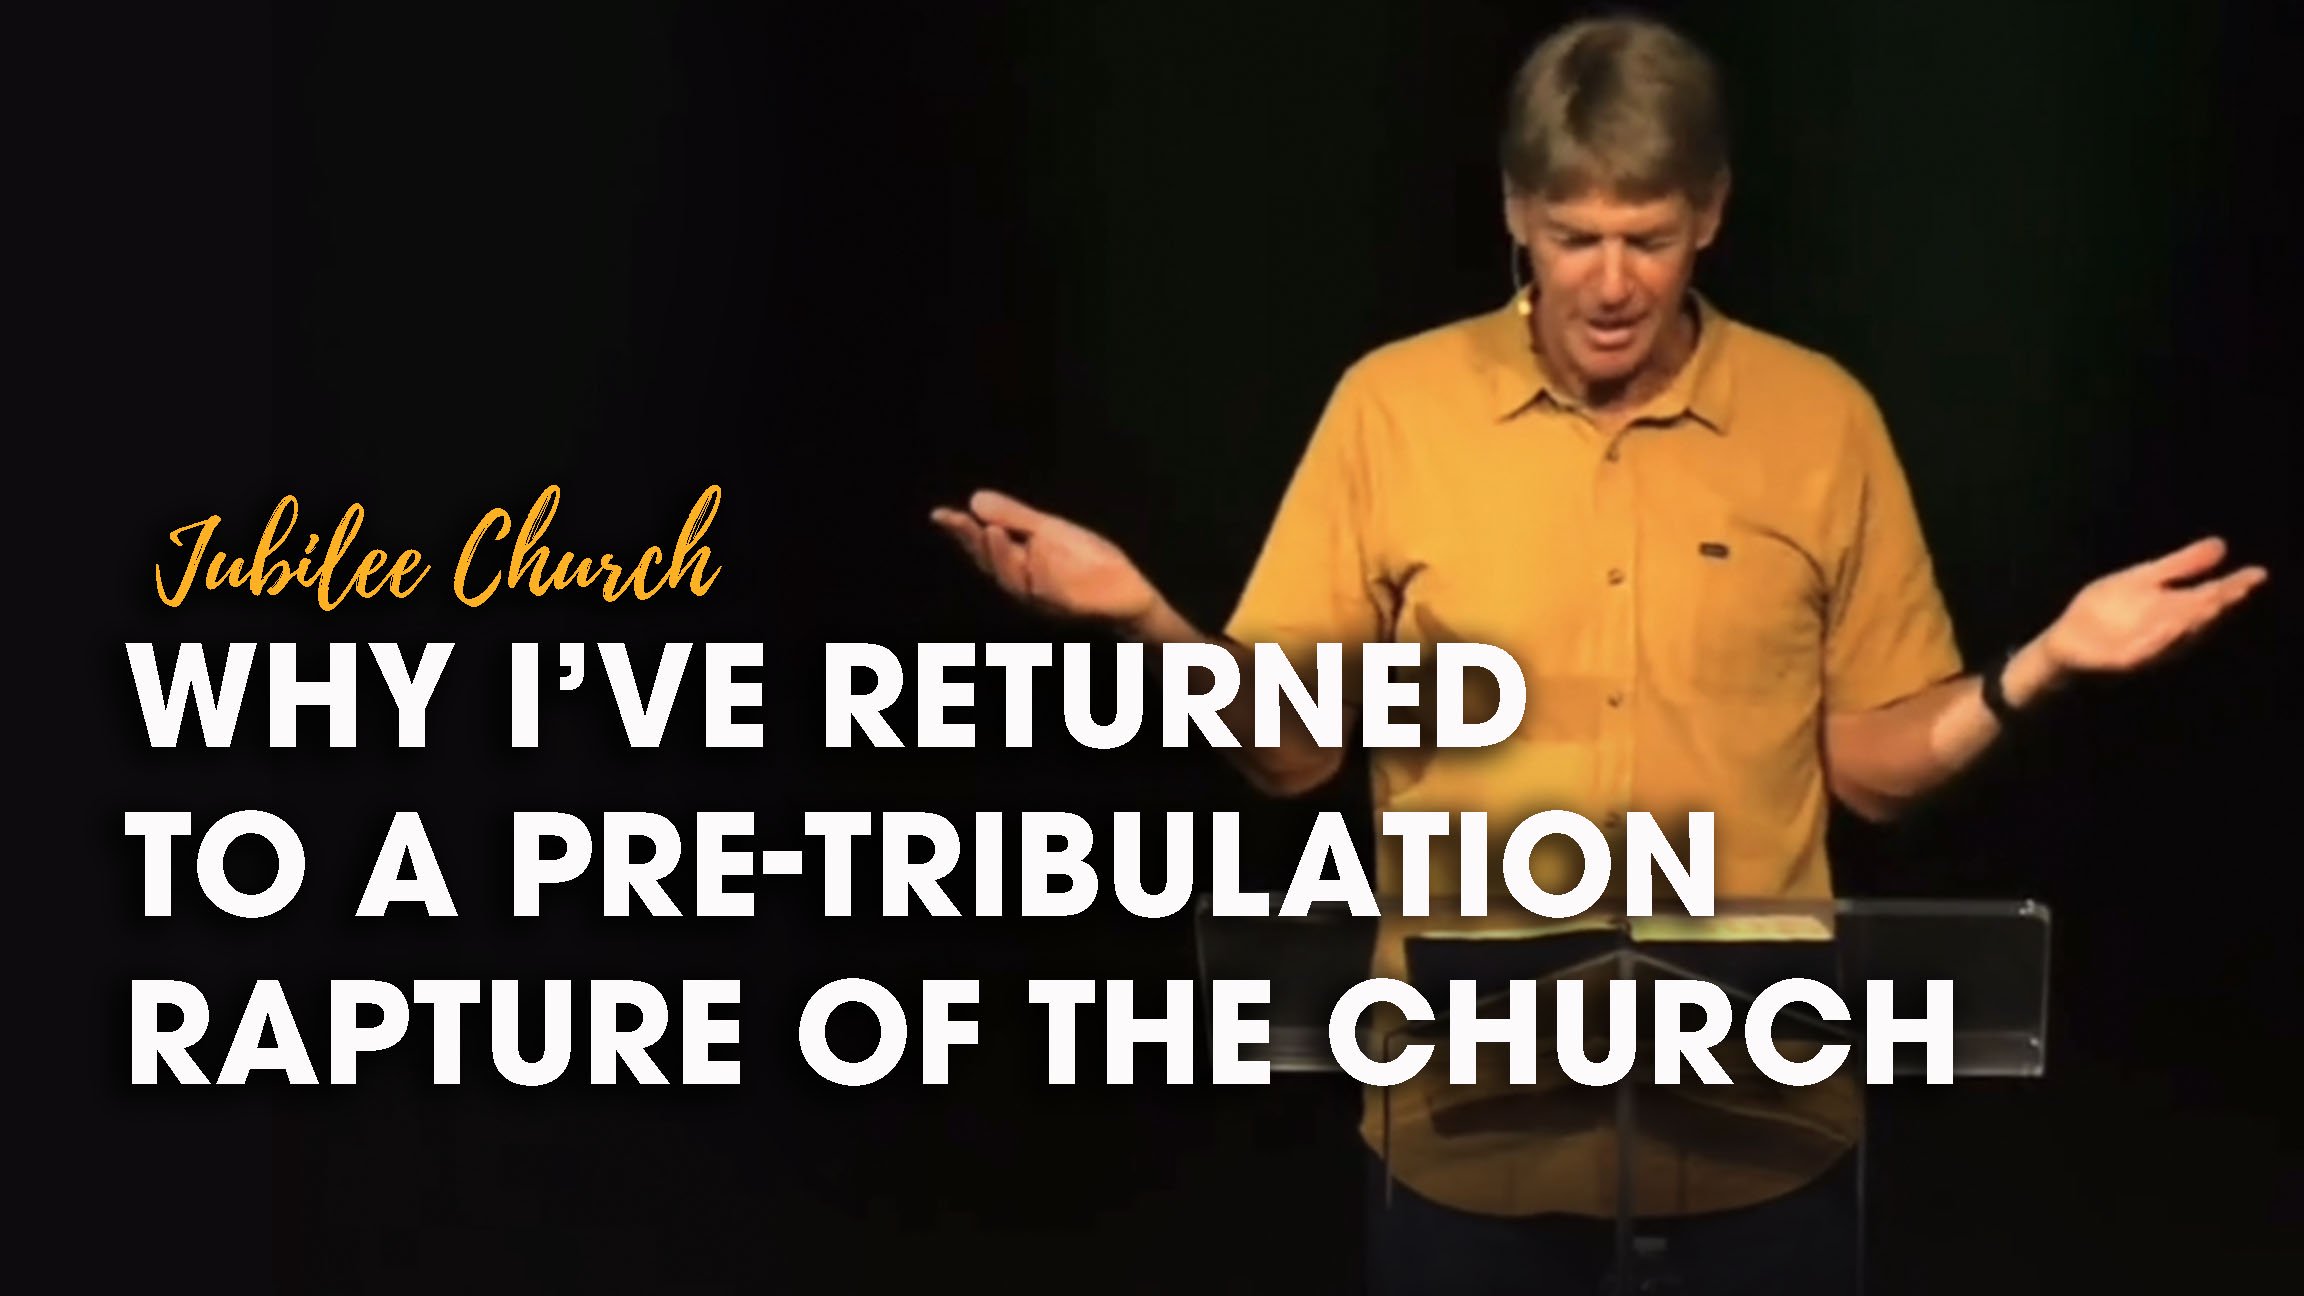 Why I have returned to a pre-tribulation rapture of the Church